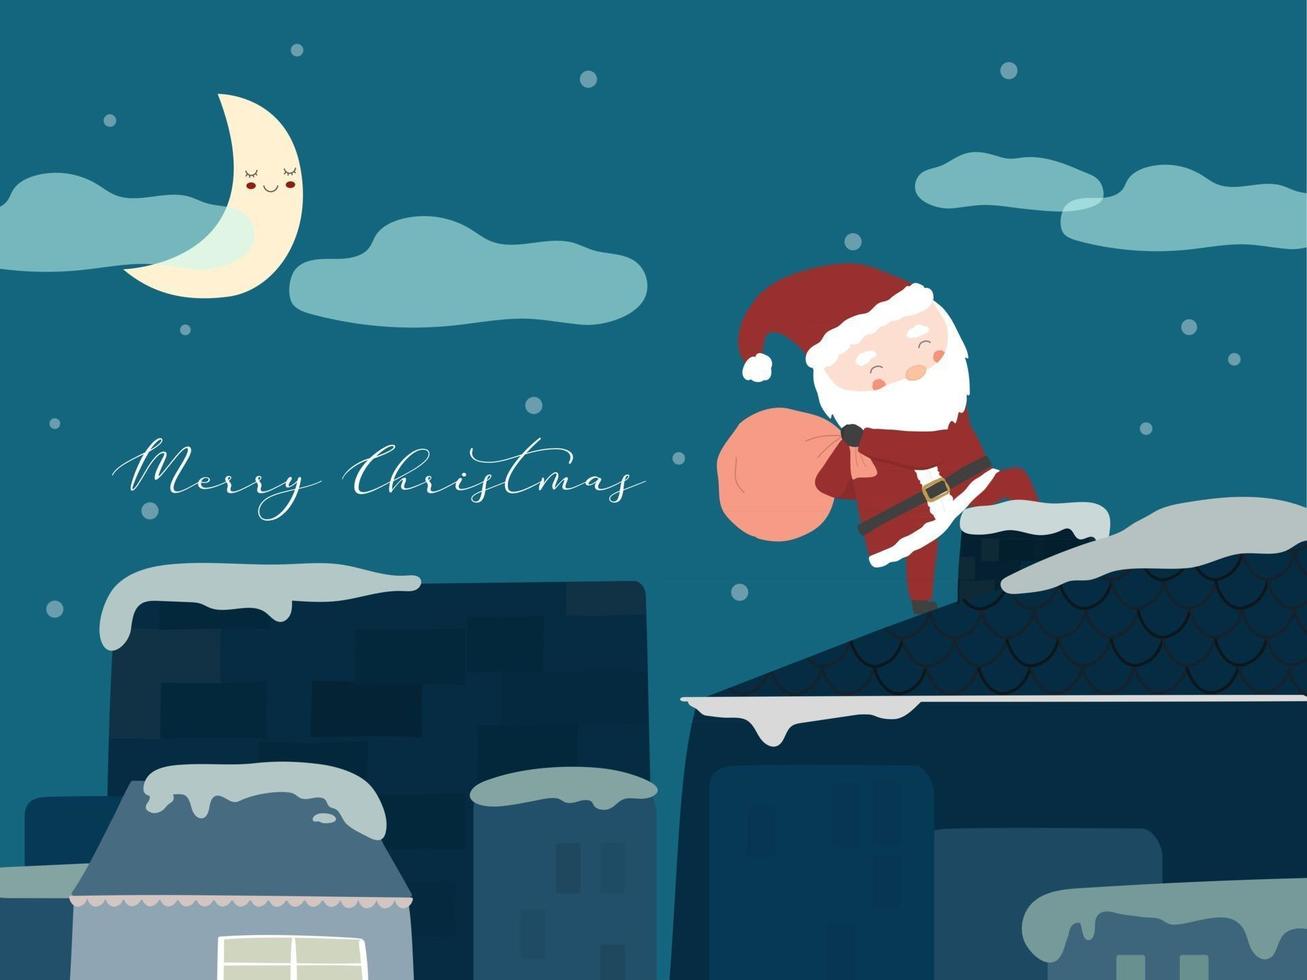 Merry Christmas with Santa Claus holding red bags standing on the chimney to give gifts. vector